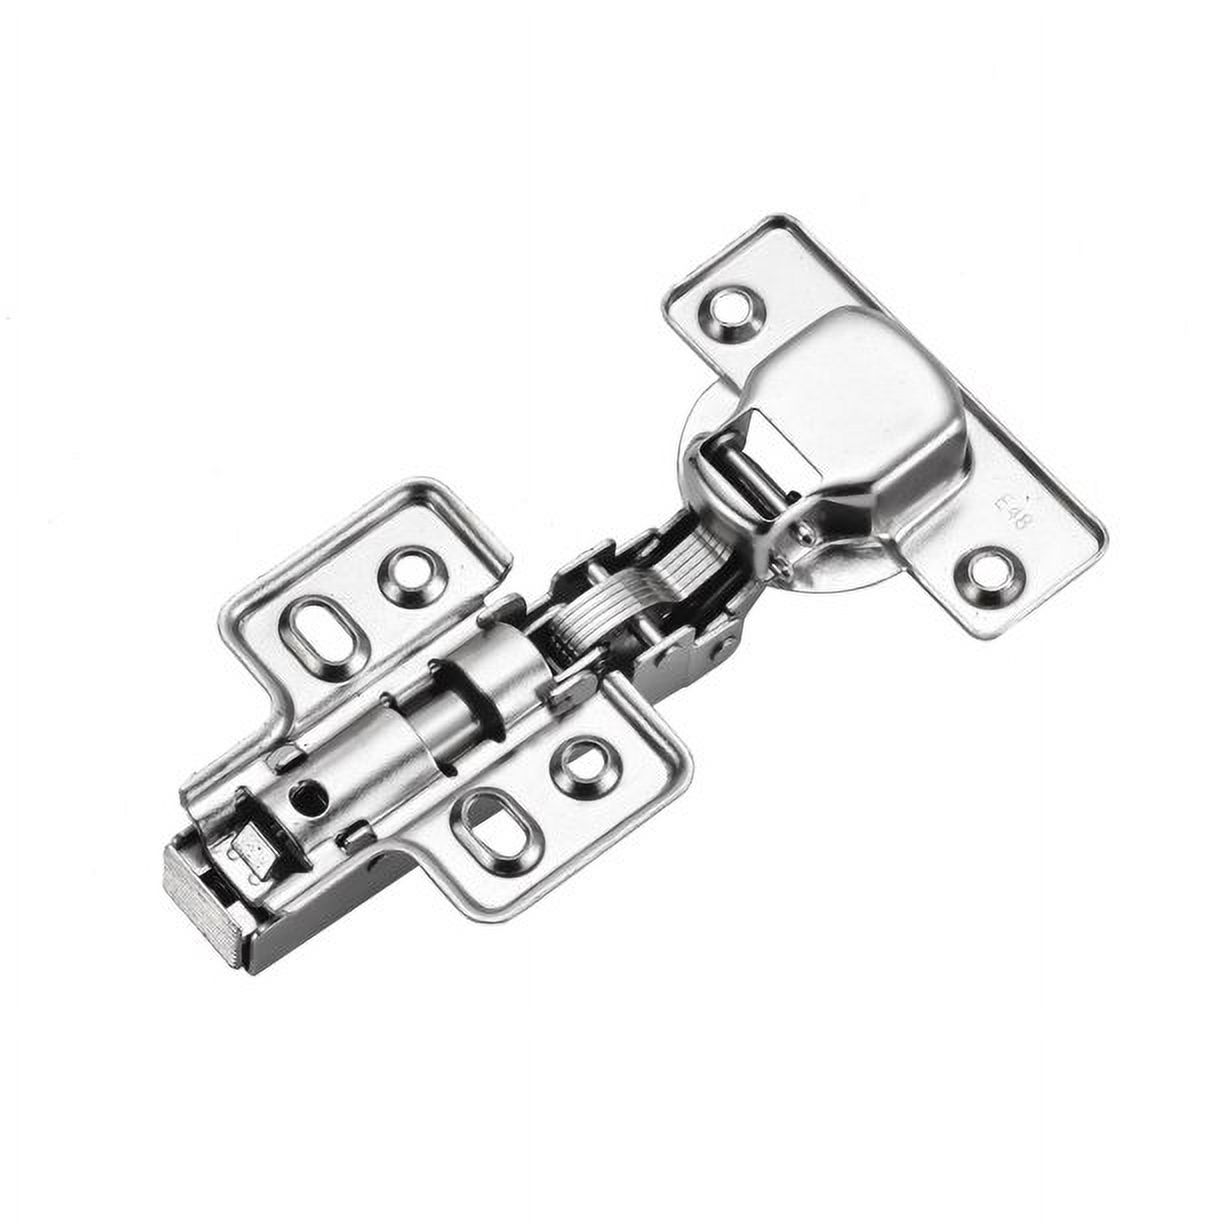 Luokim 40pcs Standard Cabinet Hinge,Fit for Frameless Cabinet,European Full Overlay,Soft Closing,Four-Hole mounting Plate Hinges,Nickel Plated Finish - image 4 of 7